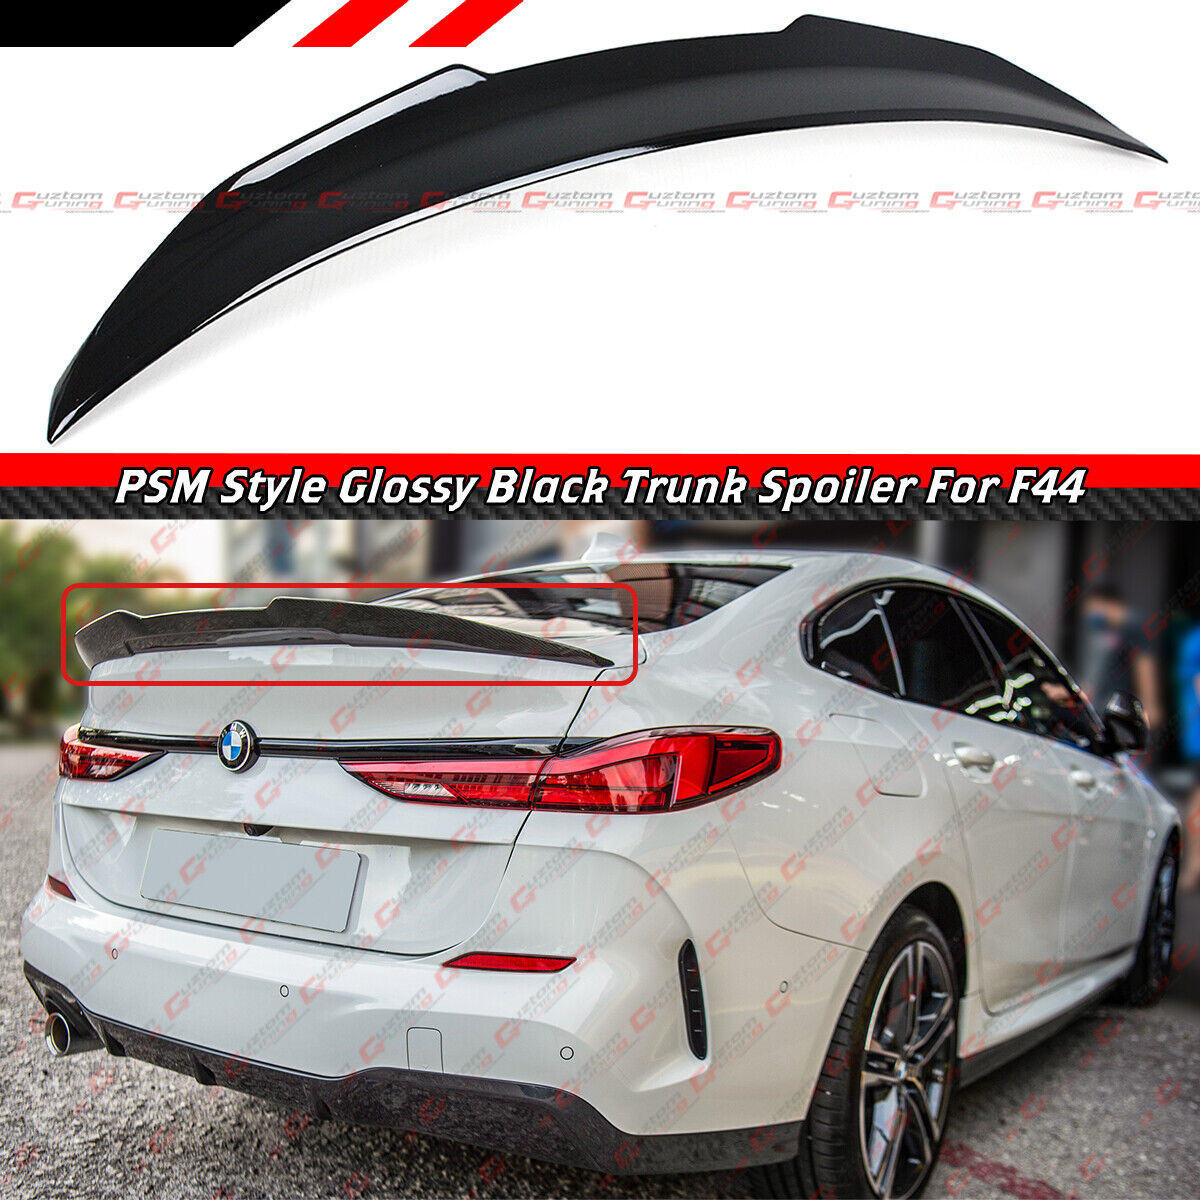 FOR 2020-23 BMW F44 228i M235i GRAN COUPE BLACK PSM STYLE HIGHKICK TRUNK SPOILER